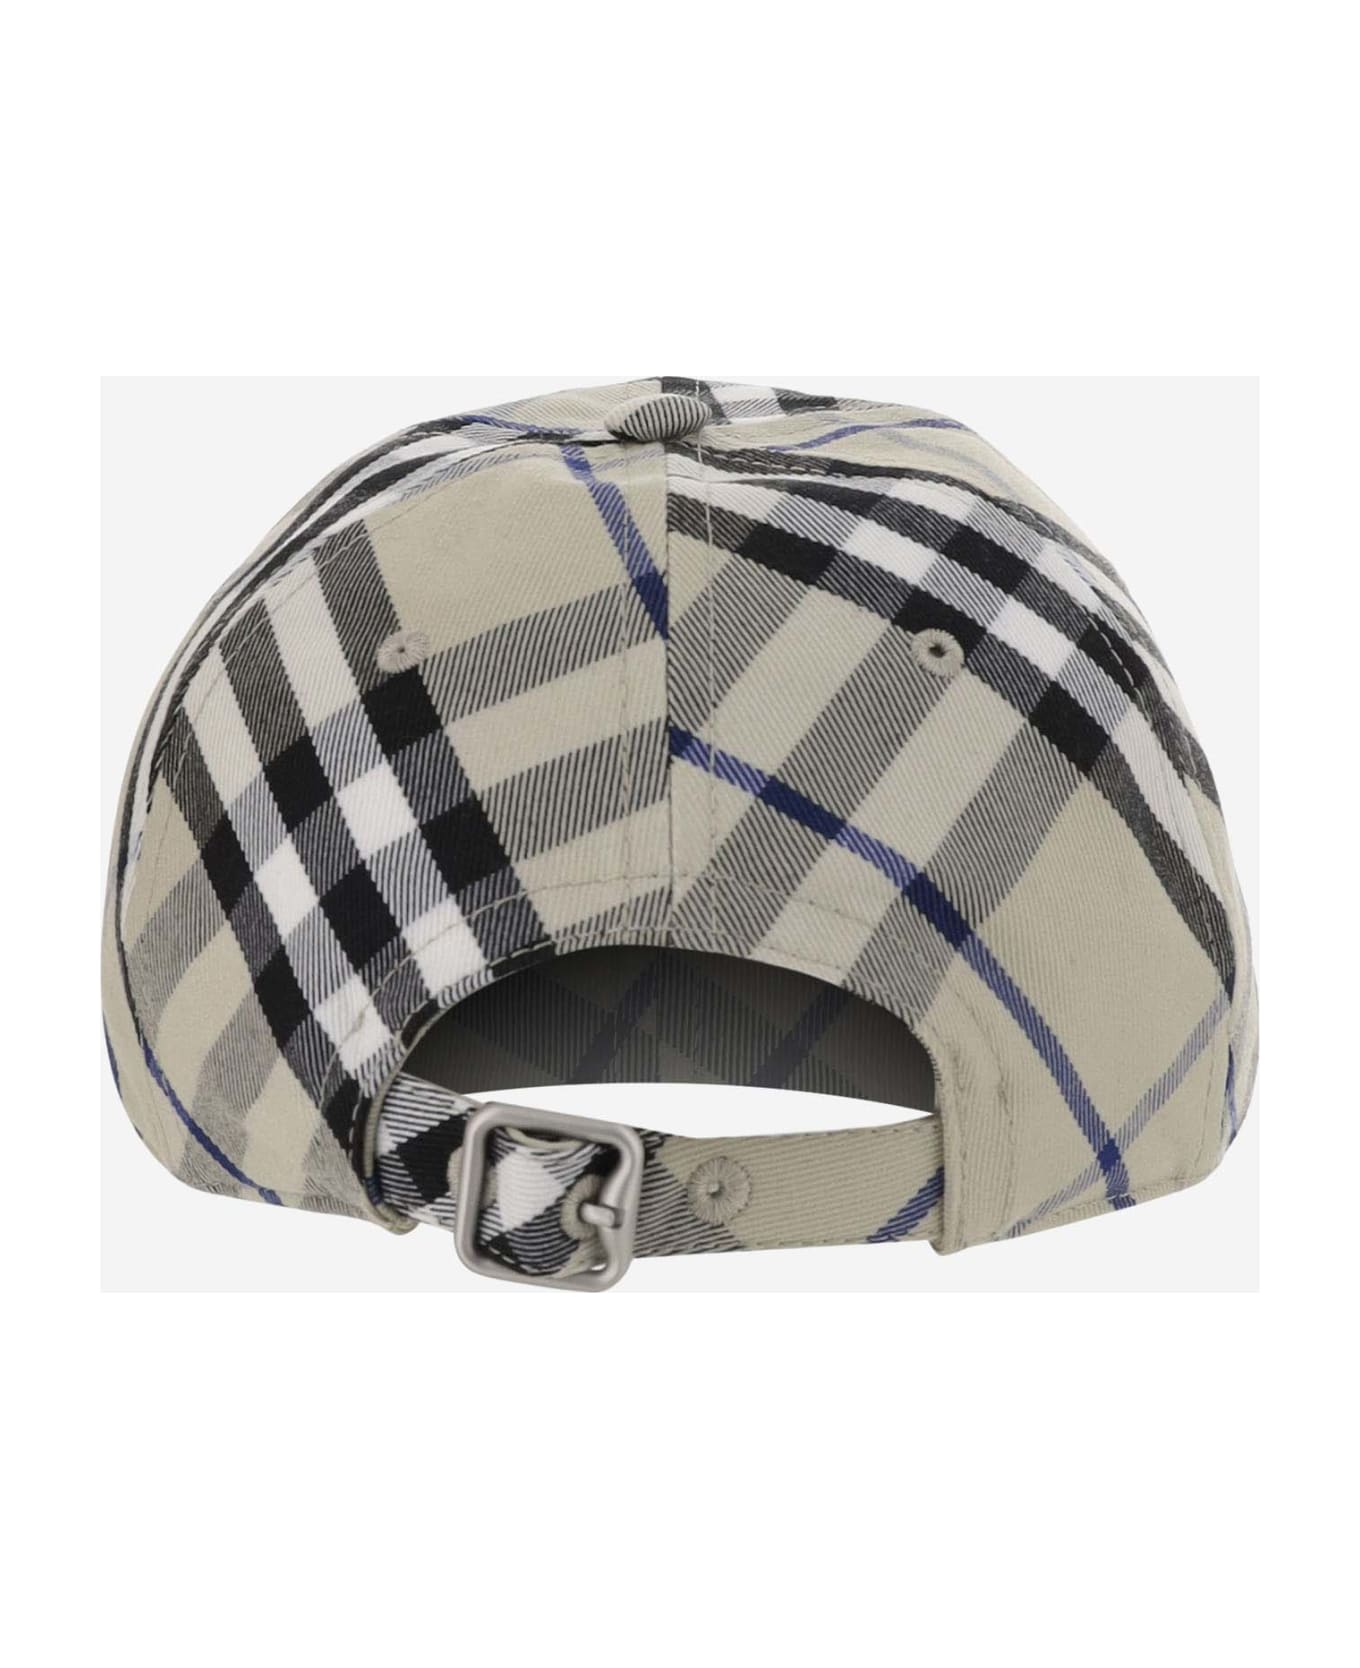 Burberry Cotton-blend Baseball Cap With Check Pattern - Grey